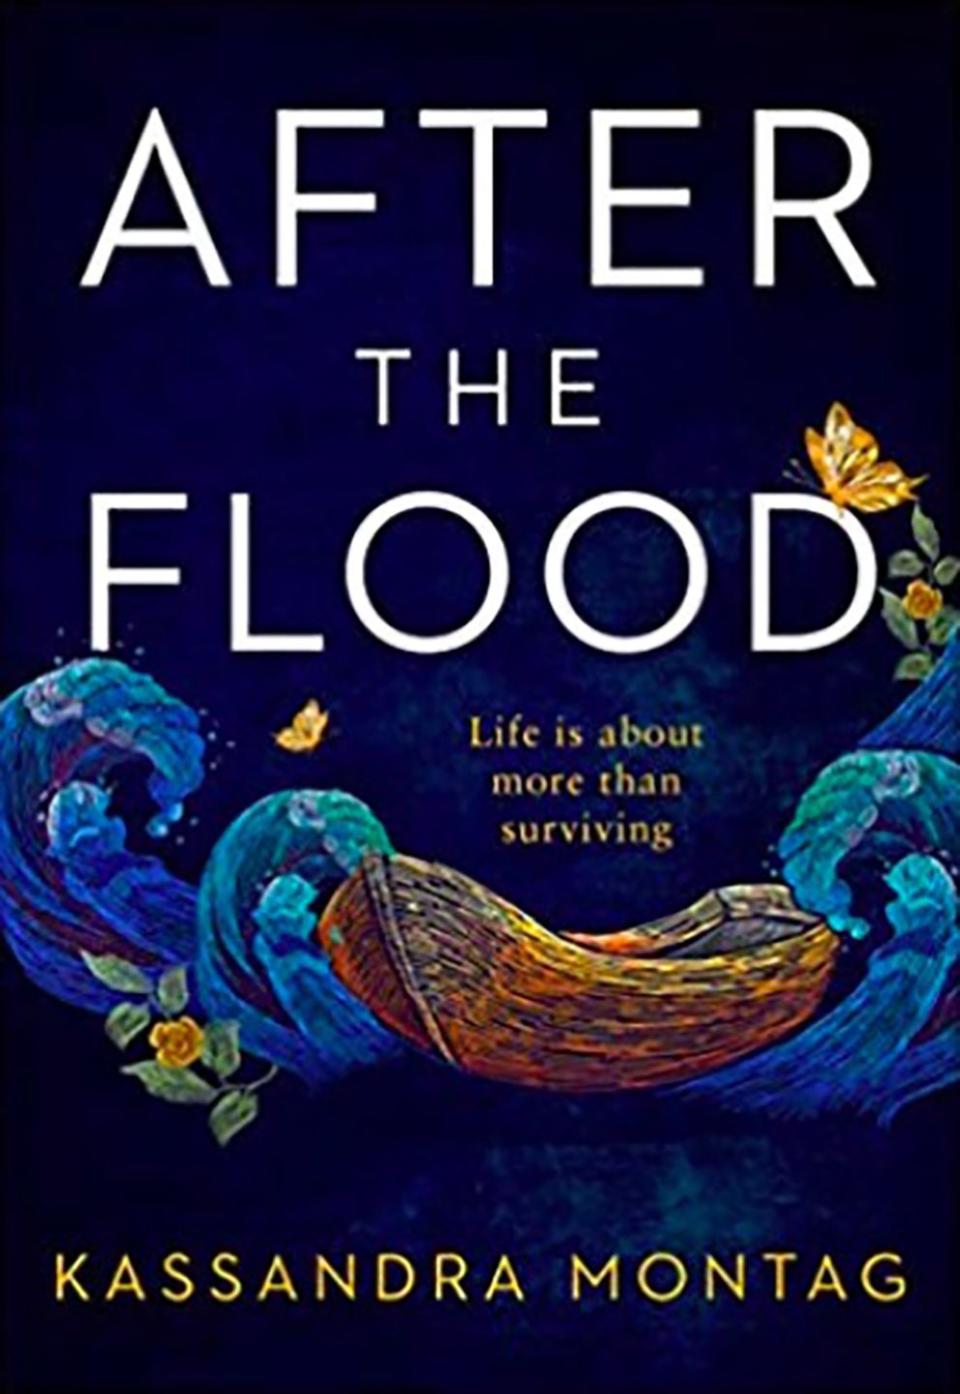 After The Floor by Kassandra Montag